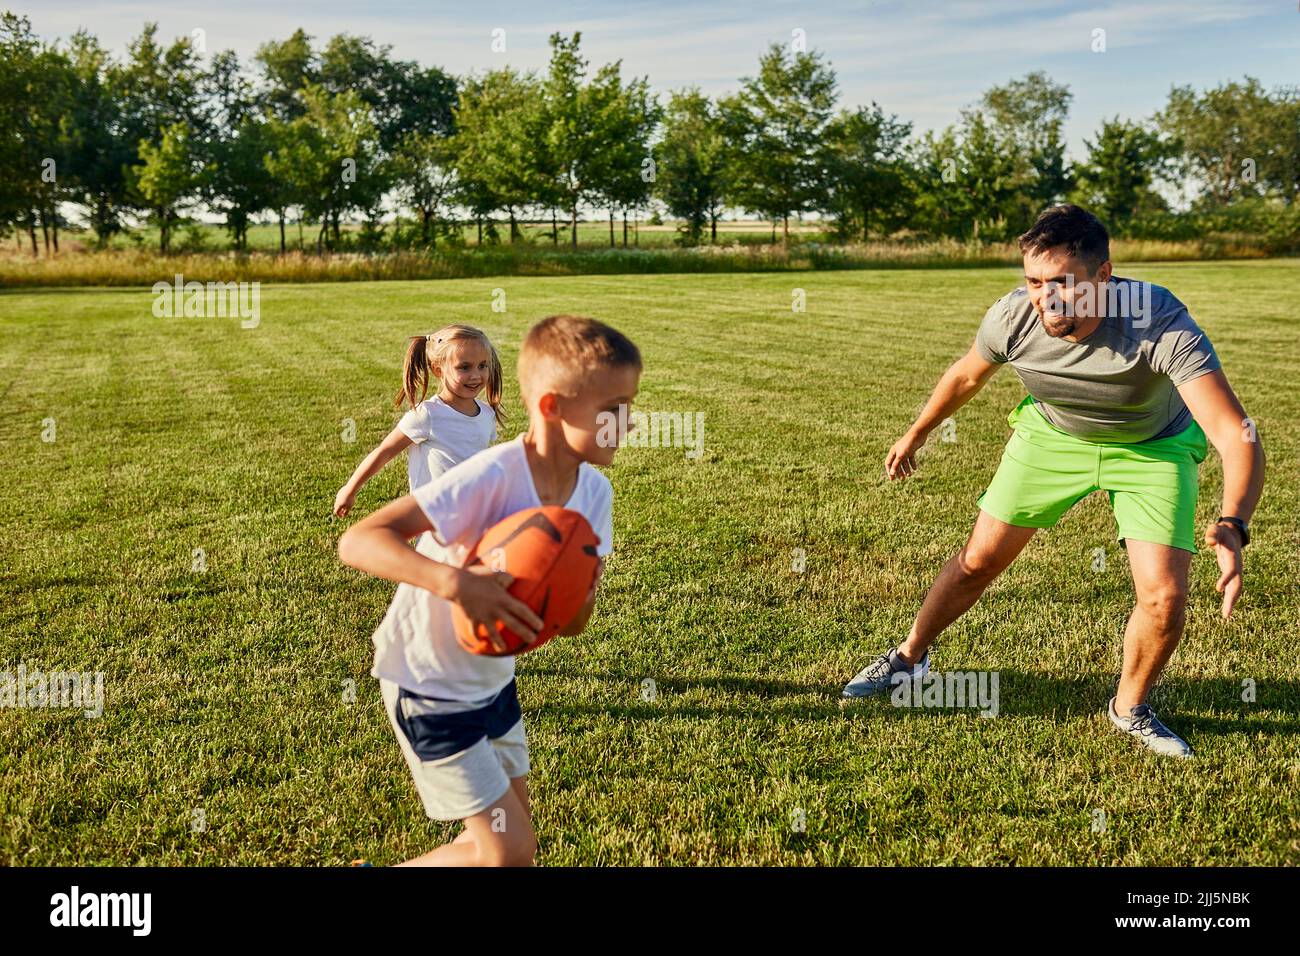 Father playing rugby with son and daughter at sports field on sunny day Stock Photo